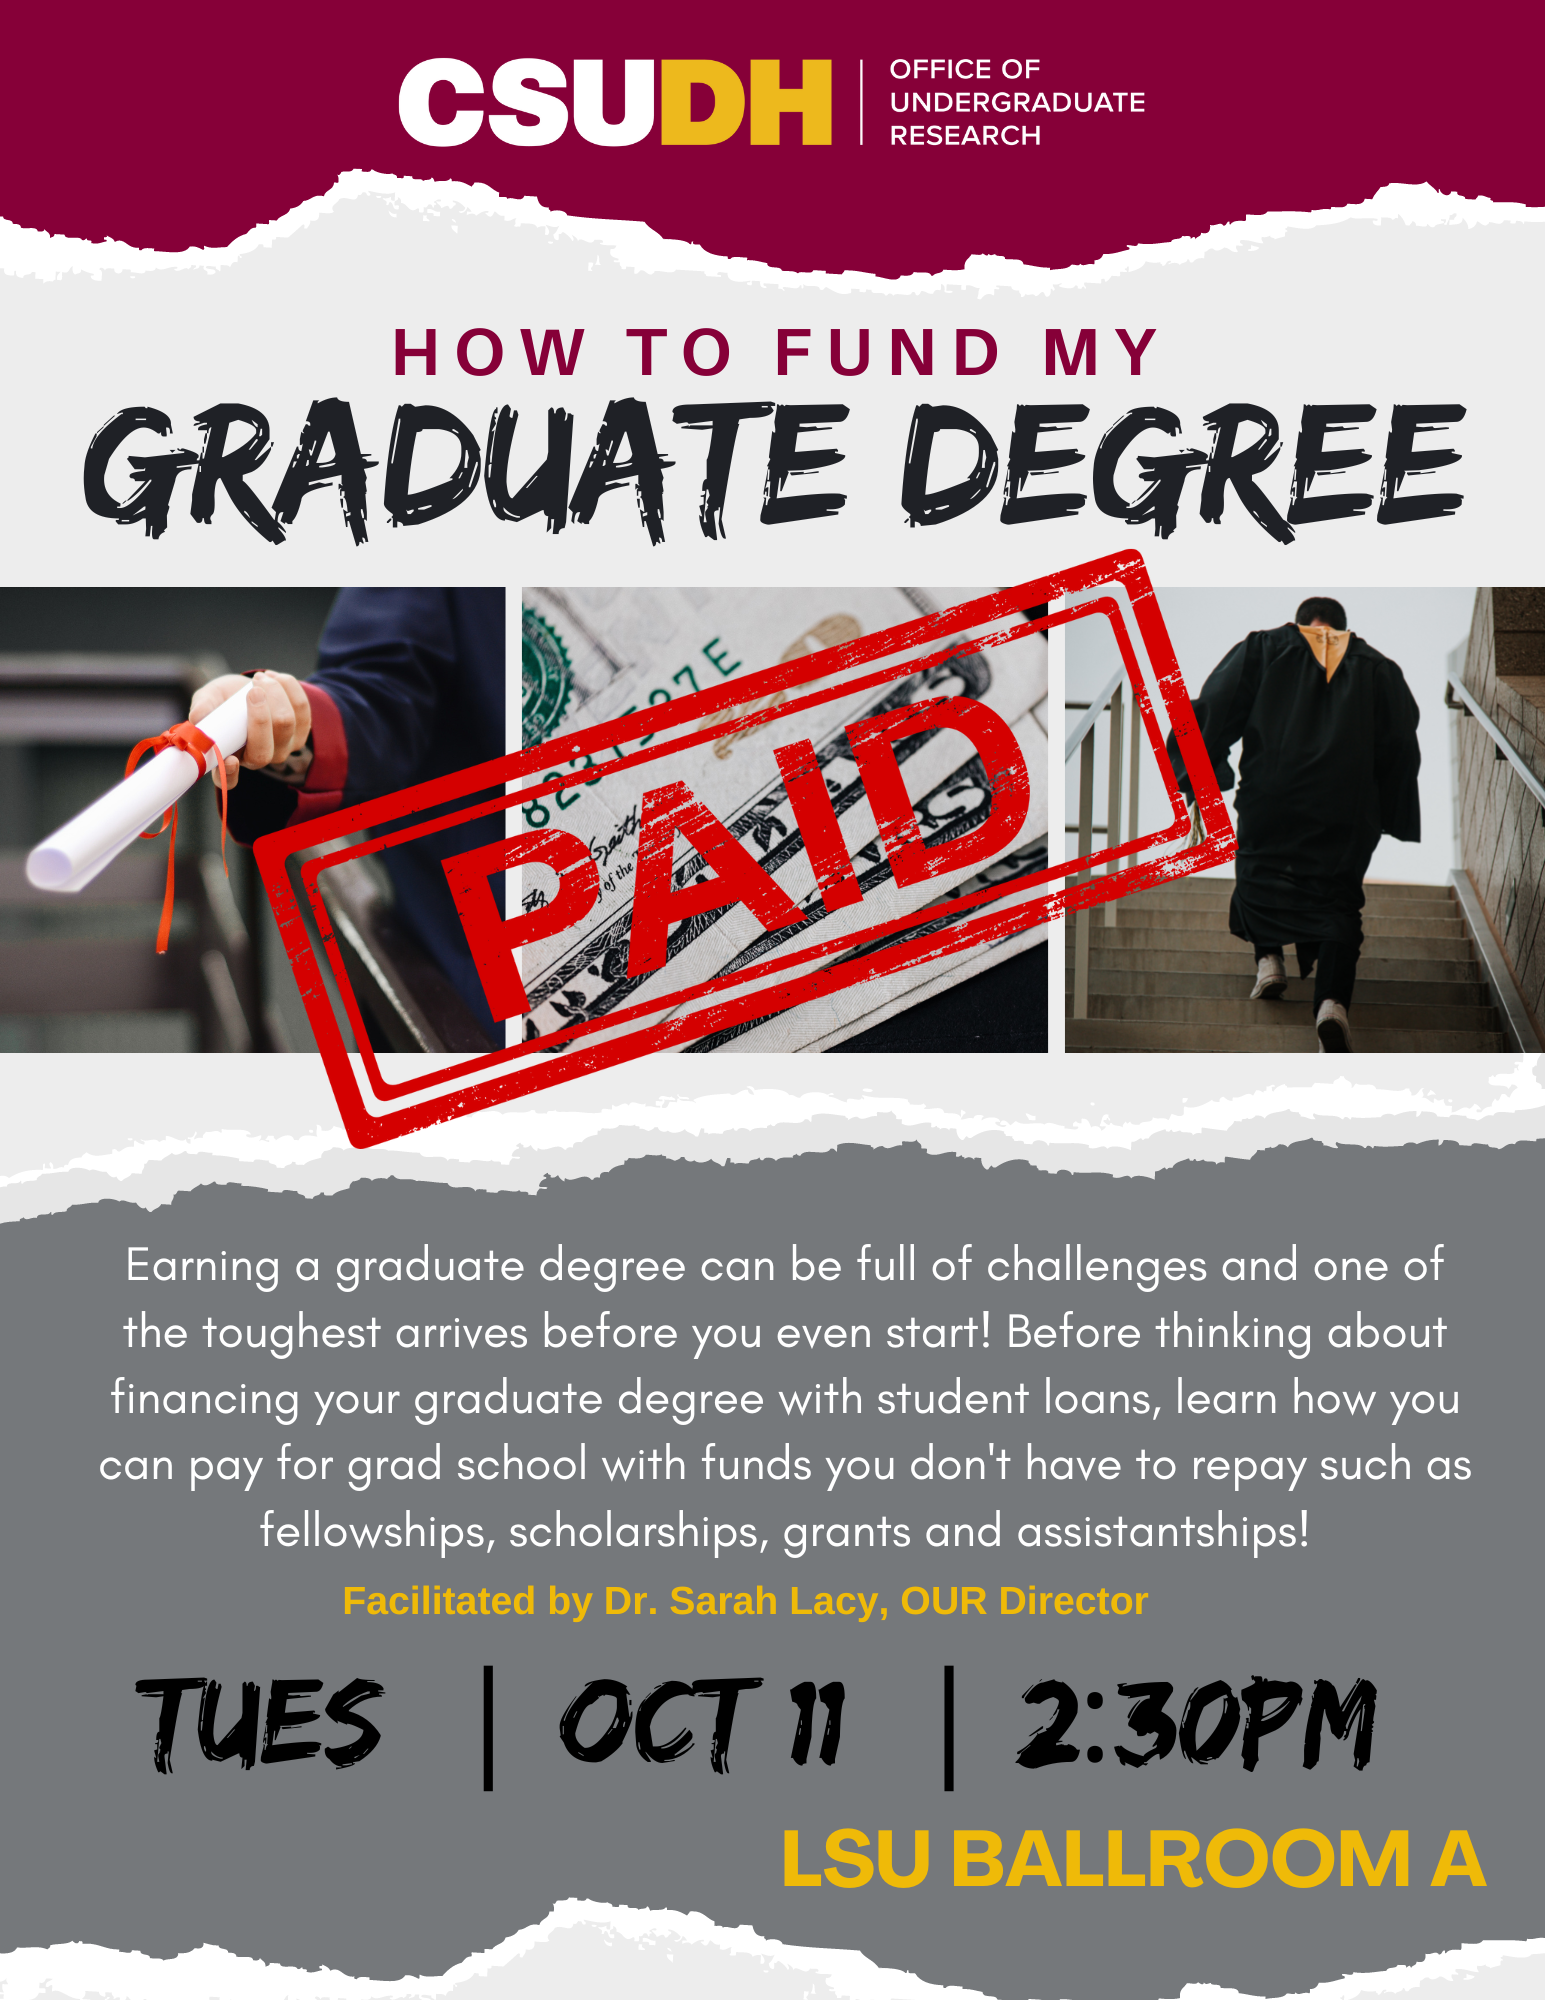 How-to-Fund-My-Graduate-Degree-Oct-11-2022.png